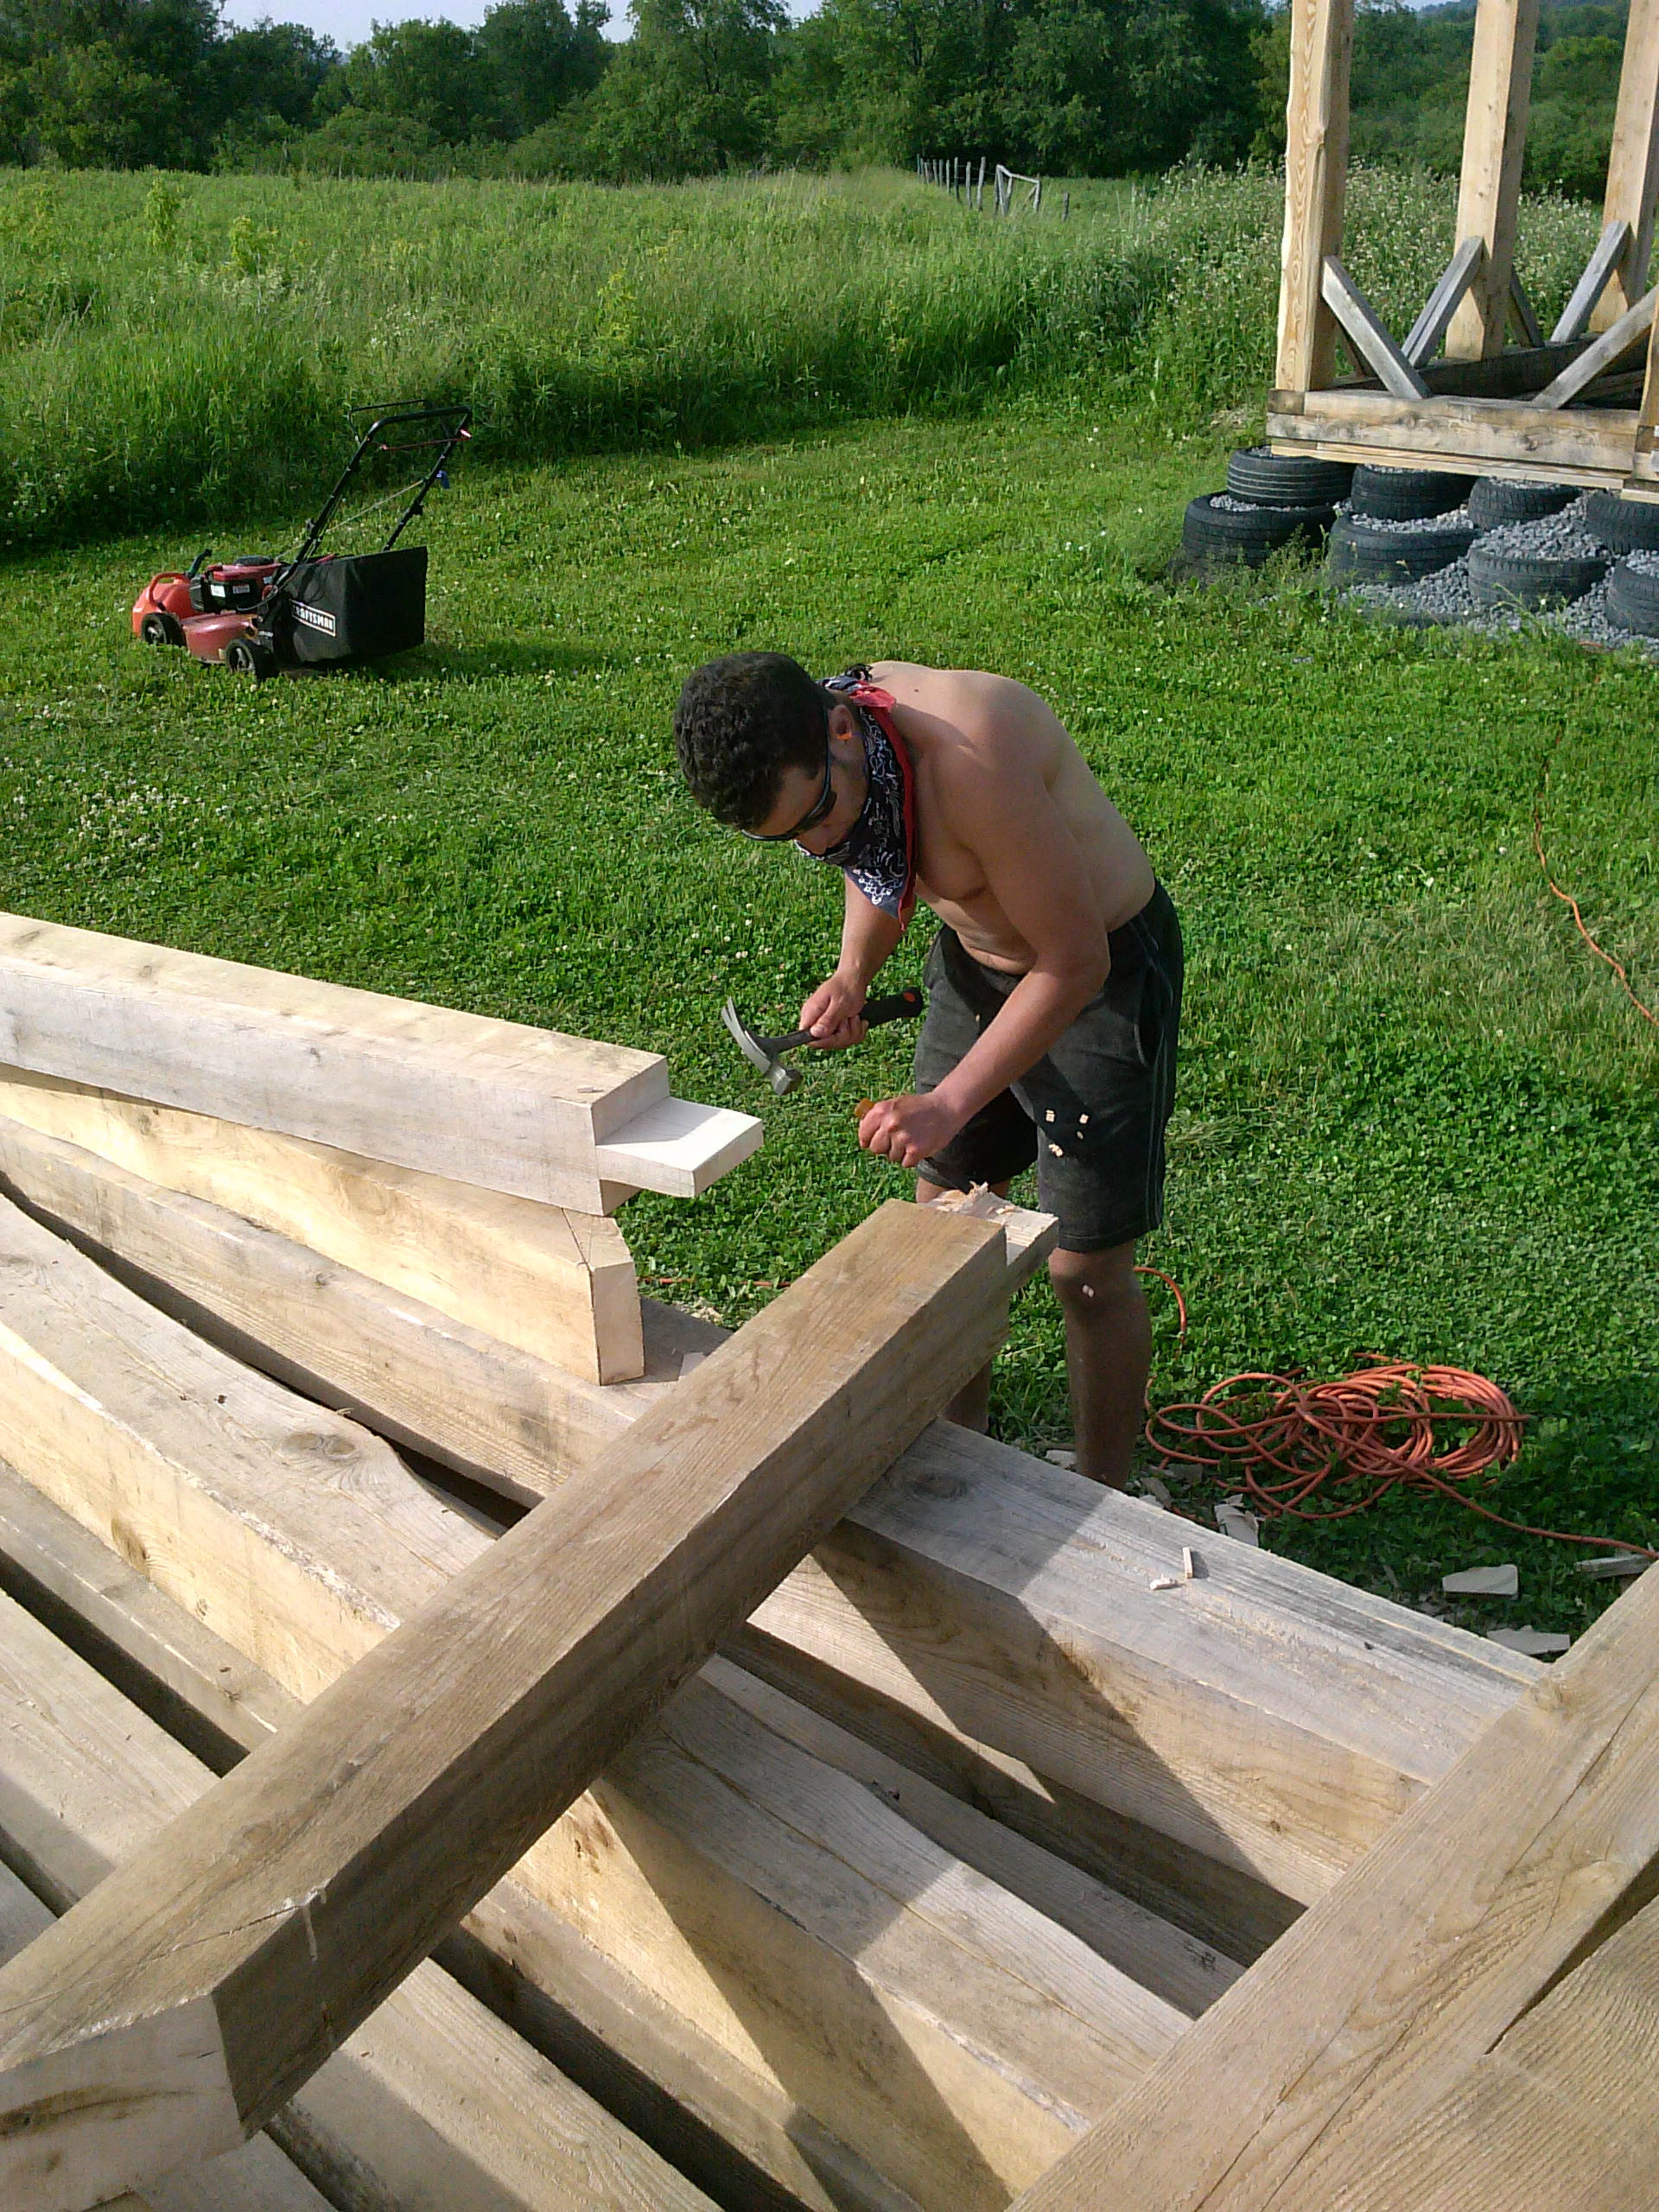 Permaculture intern working on construction on the timber framed barn